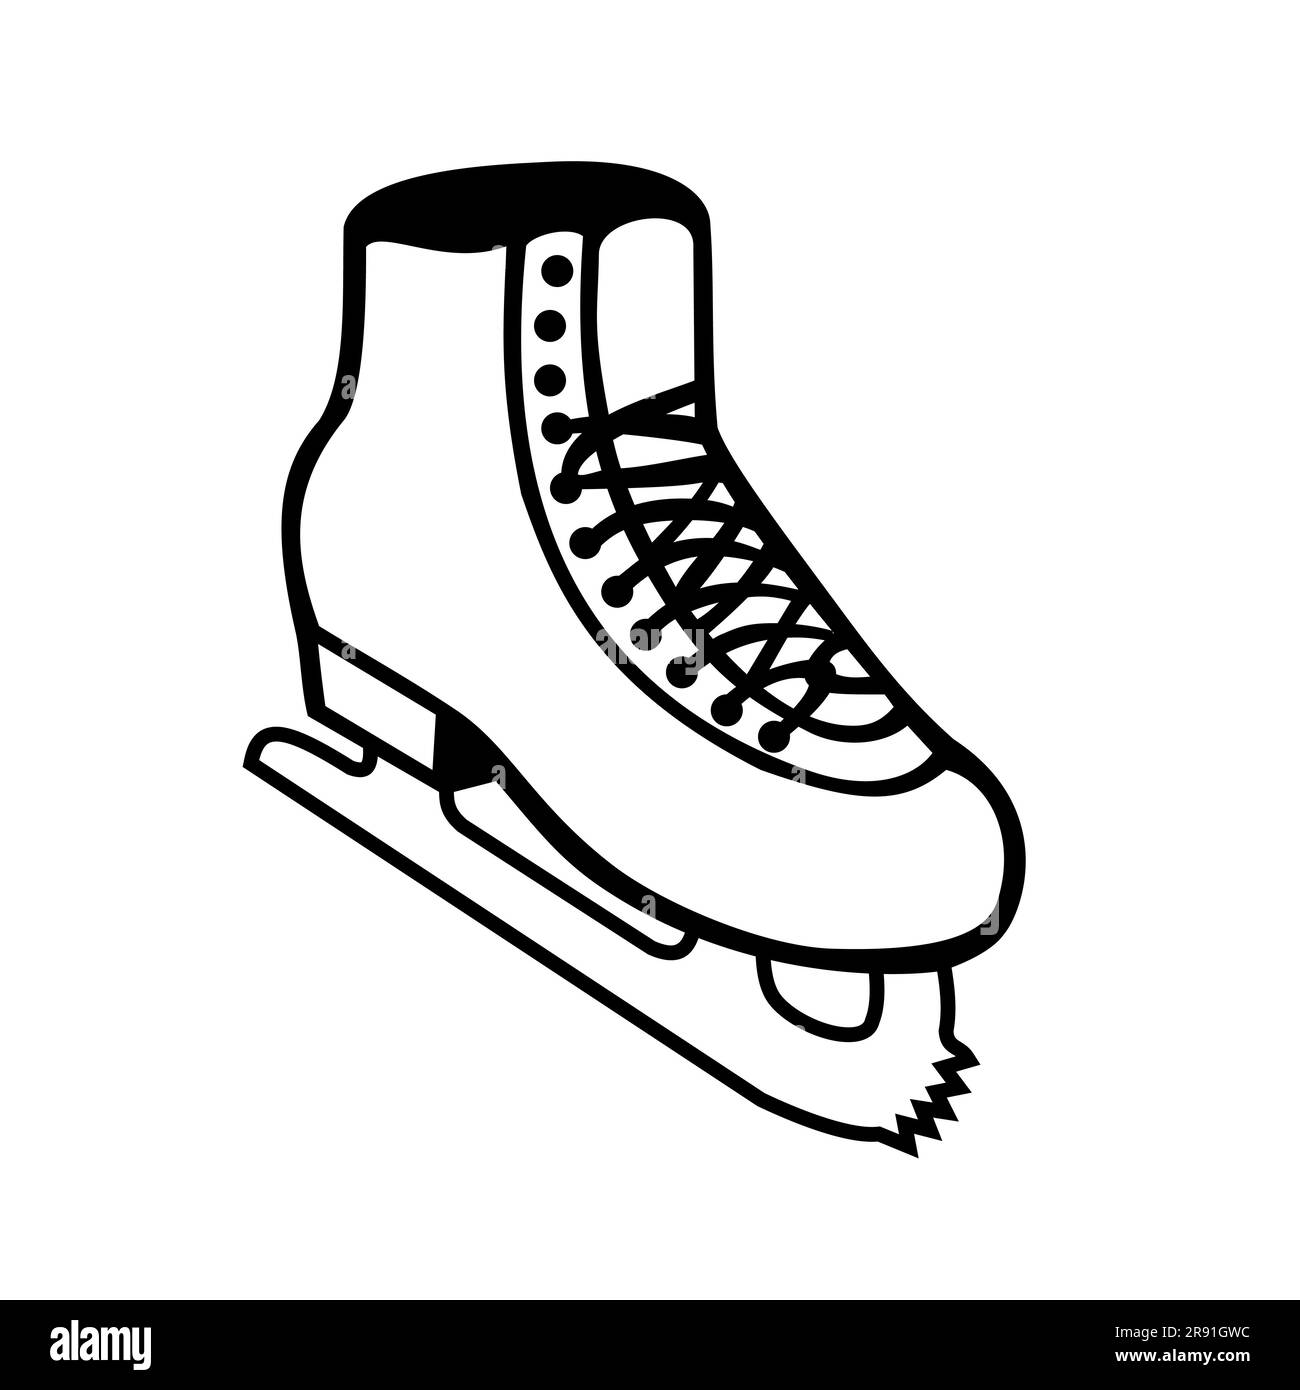 Retro style illustration of Ice skates or ice skating shoes boots with blades viewed from side on isolated background done in cartoon black and white. Stock Photo